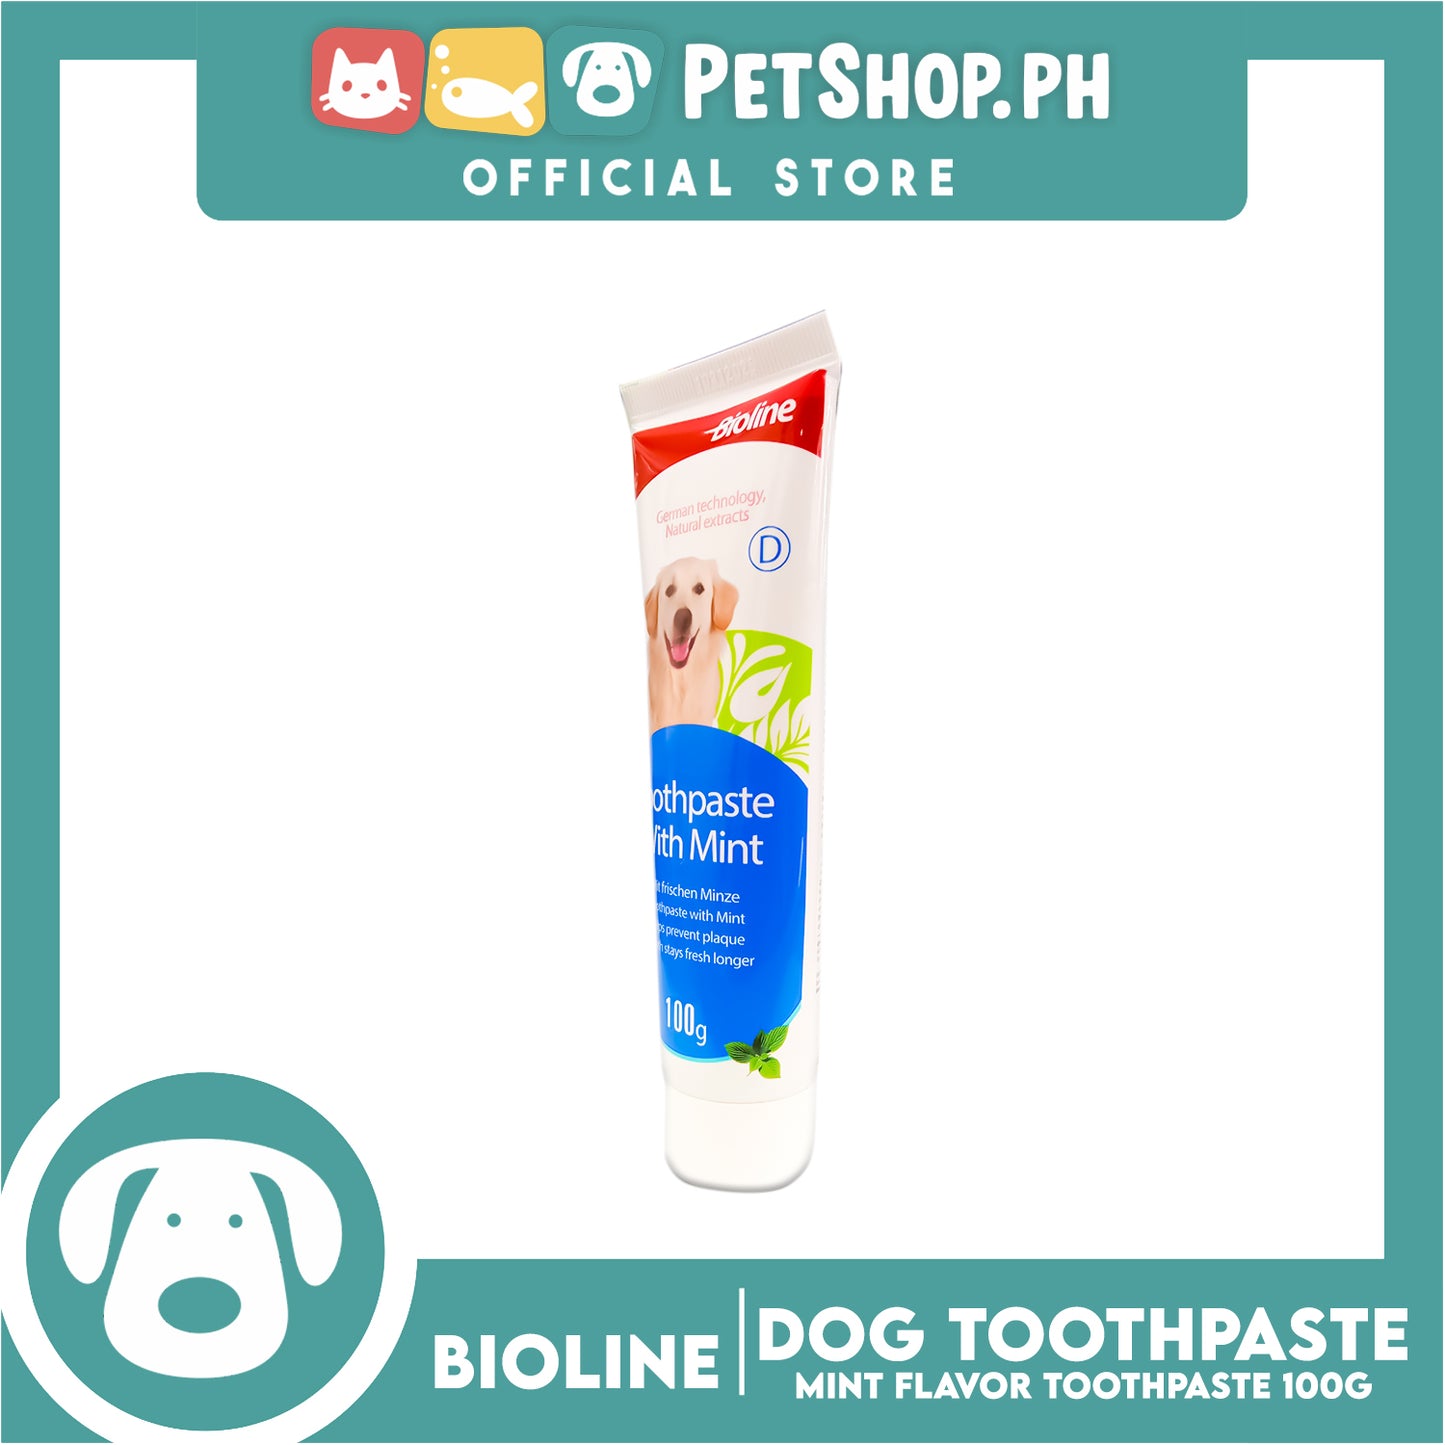 Bioline Toothpaste Mint Flavor 100g For Pets Use Only